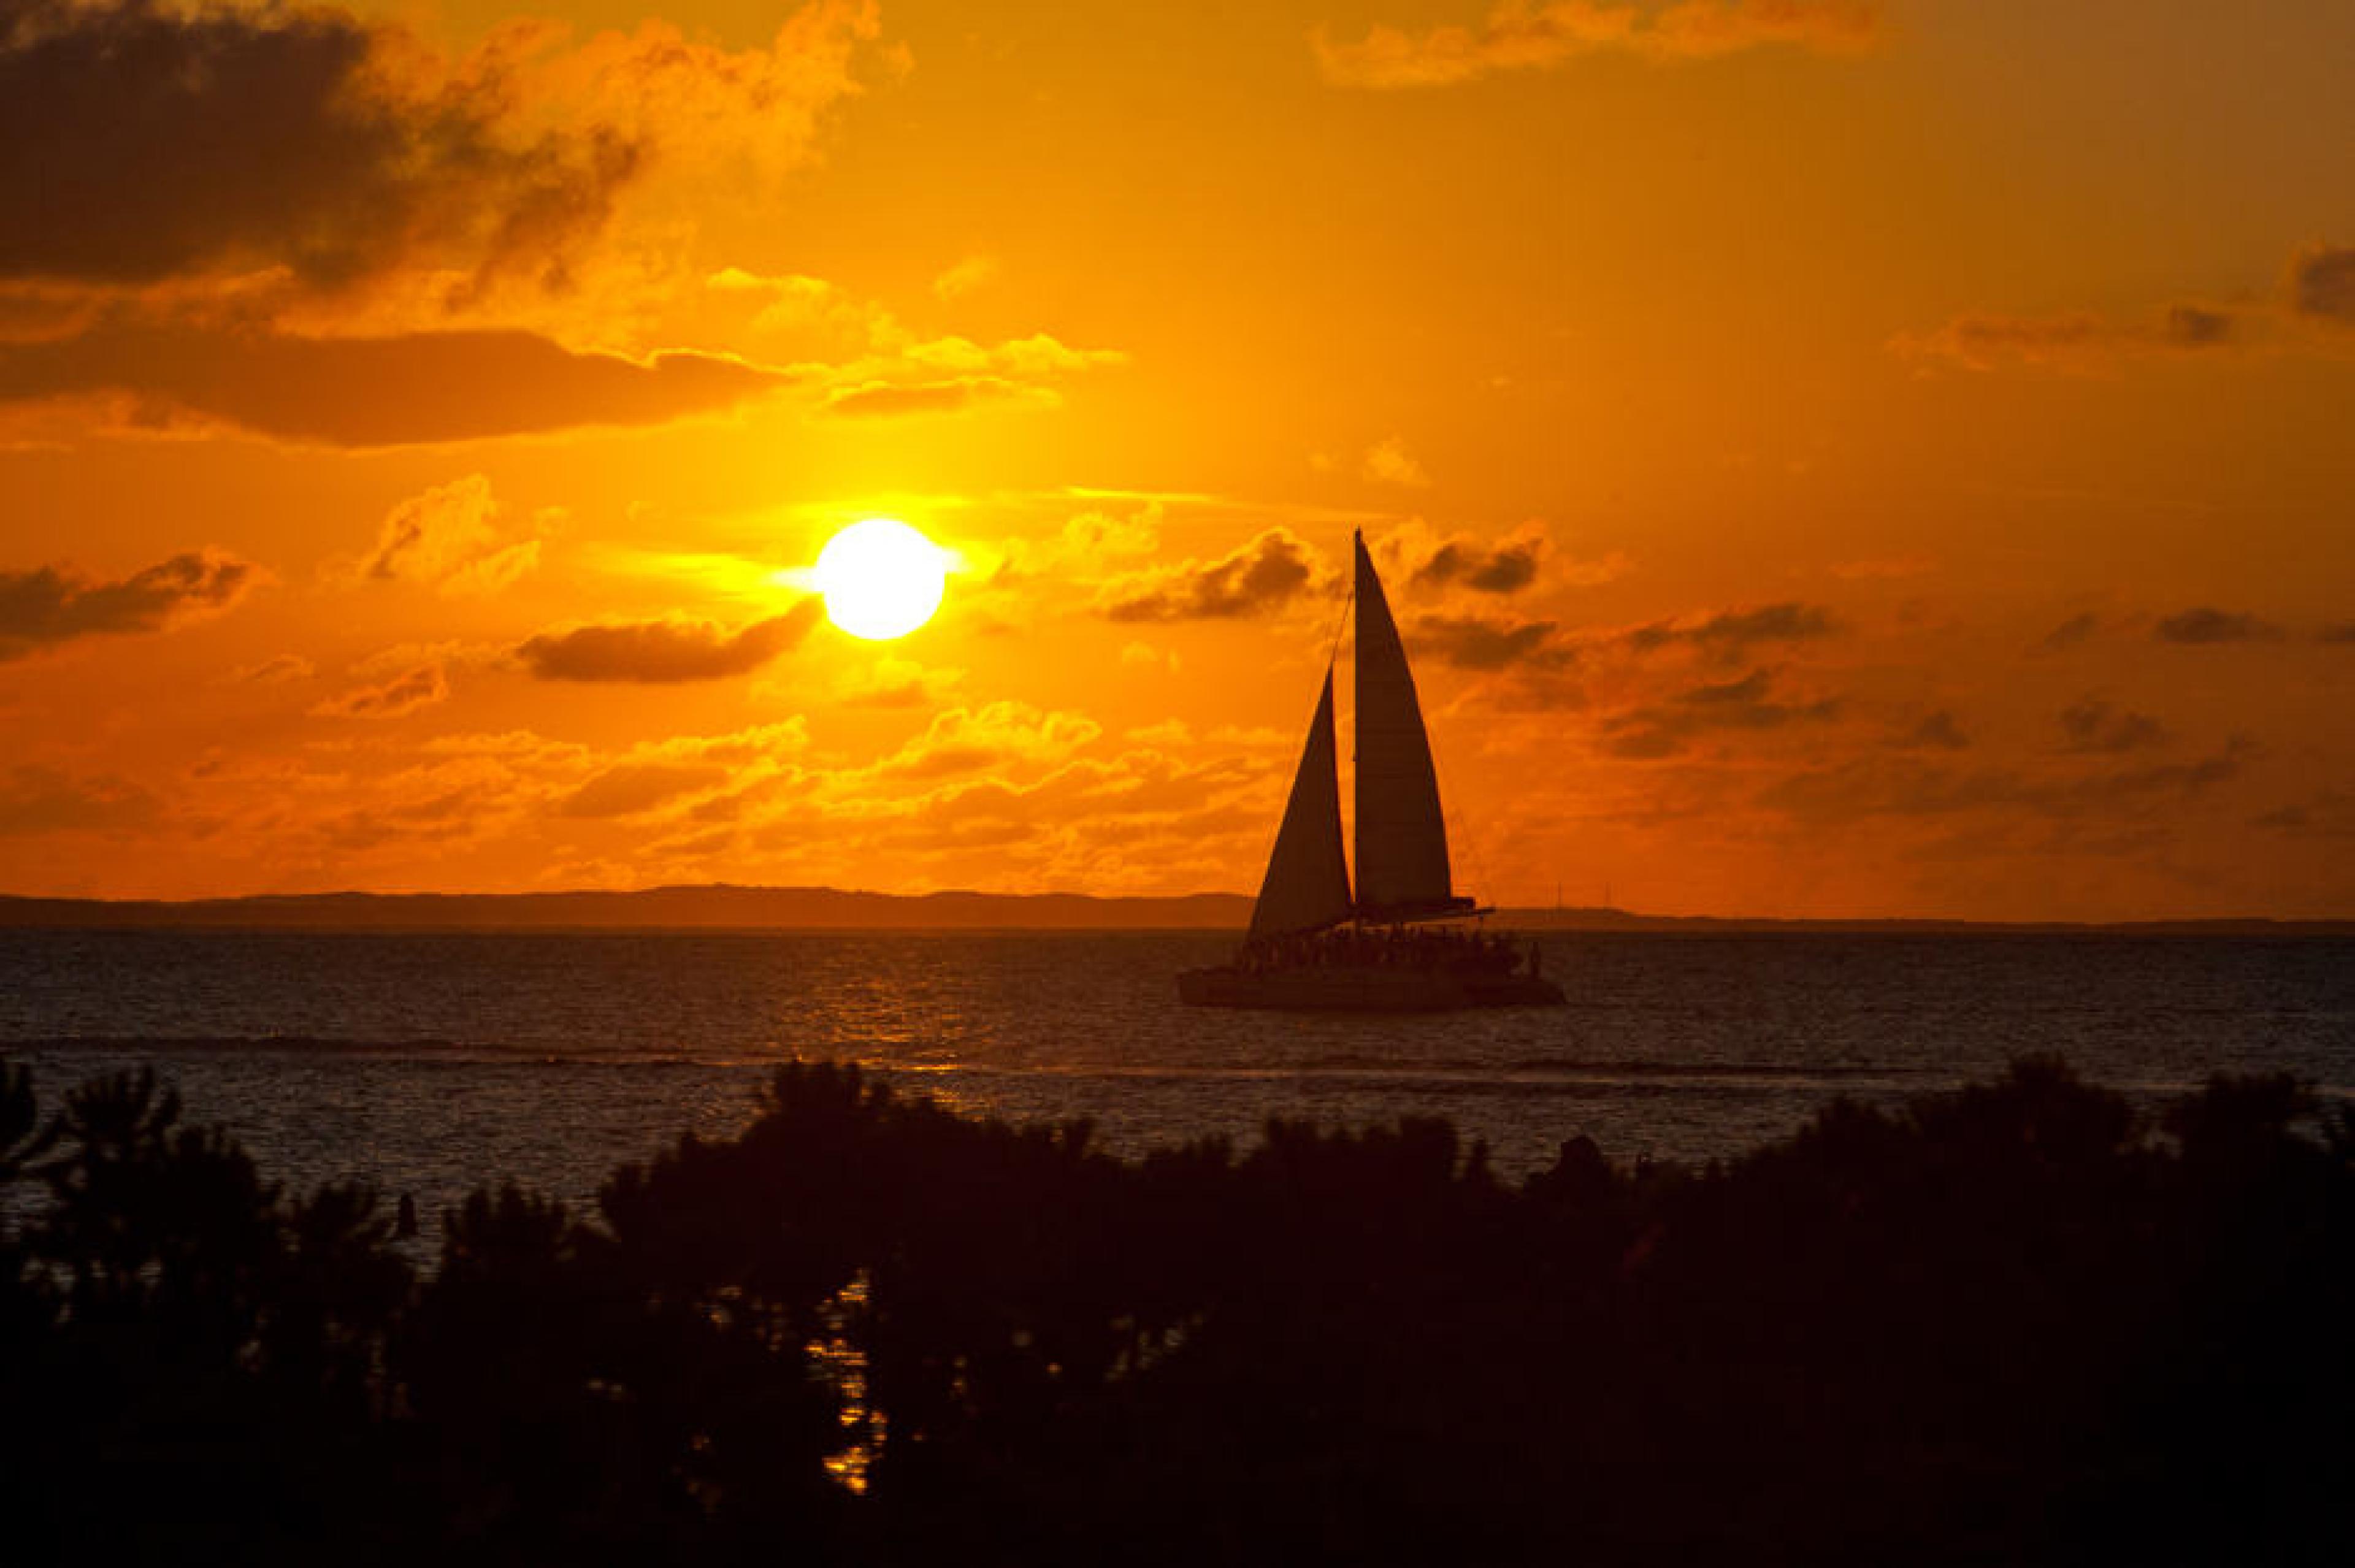 Beautiful Sunset at Boat Charters , Caicos, Caribbean - Courtesy Brilliant Studios for Turks and Caicos Tourism